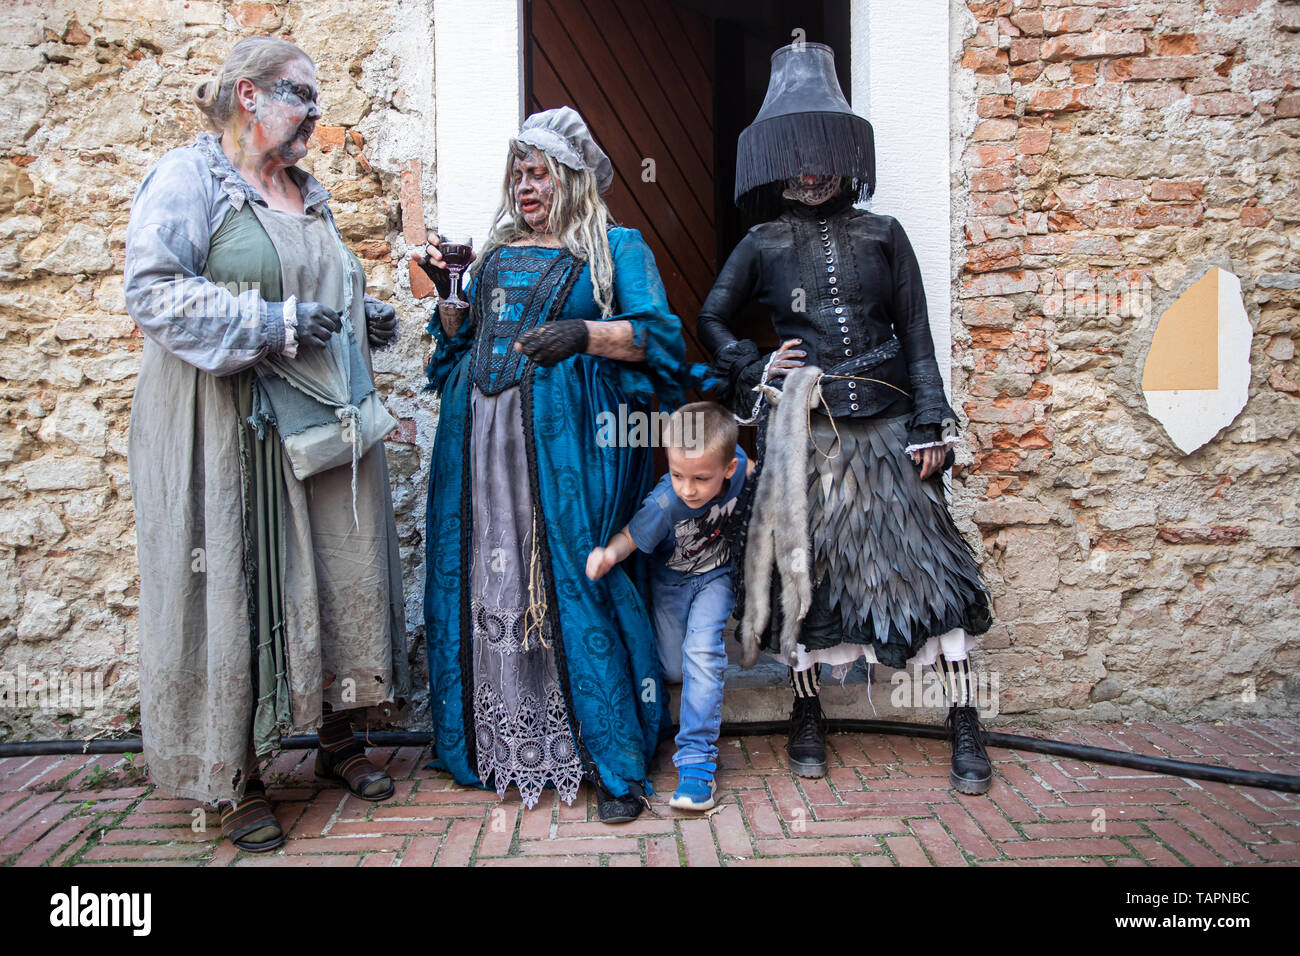 Lukavec, Croatia. 25th May, 2019. Women dressed as witches participate in the Perunfest, a festival dedicated to forgotten stories and folktales from ancient ages, at Lukavec Castle in Lukavec, Croatia, May 25, 2019. Credit: Davor Puklavec/Xinhua/Alamy Live News Stock Photo